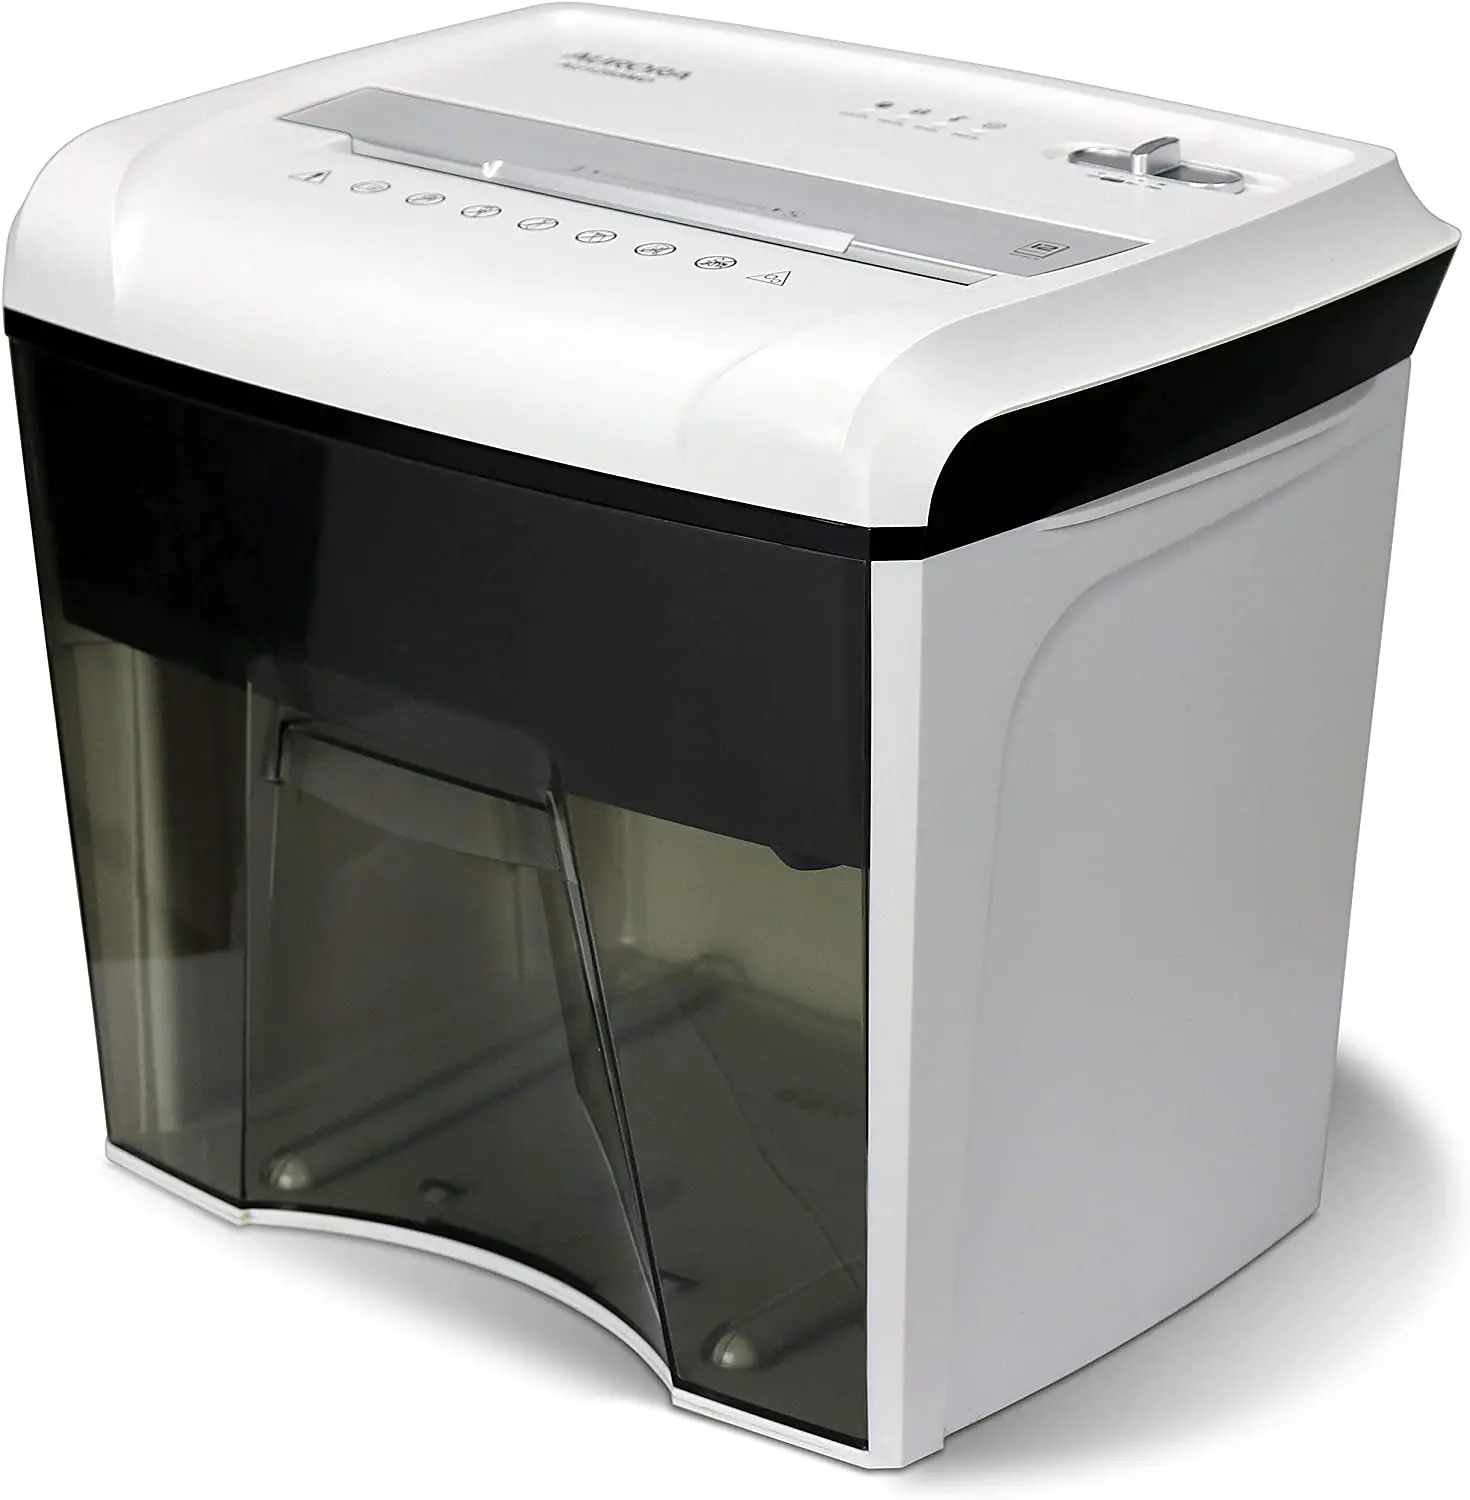 

AU1285MD Compact Desktop-Style High Security 12-Sheet Micro-Cut Paper and CD/Credit Card/Junk Mail Pullout Basket Shredder, Whit